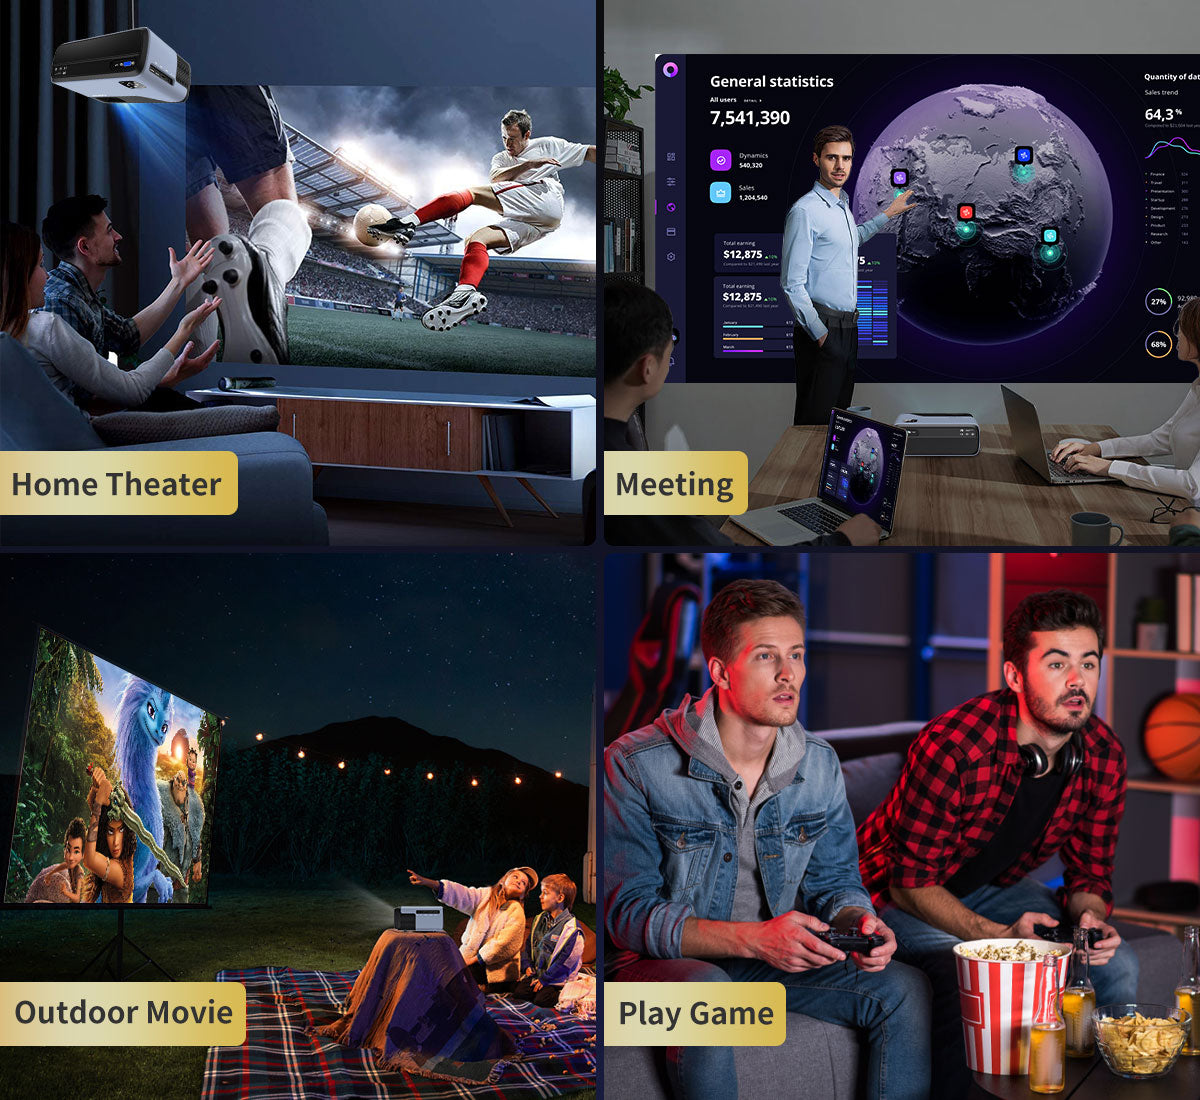 Portable 4K Movie Projector with WiFi Bluetooth,Smart Native 1080P Home Outdoor Projectors with Netflix Youtobe,LED Small Video Proyector for Home Theater Games Sports Laptop Phone Fire Stick